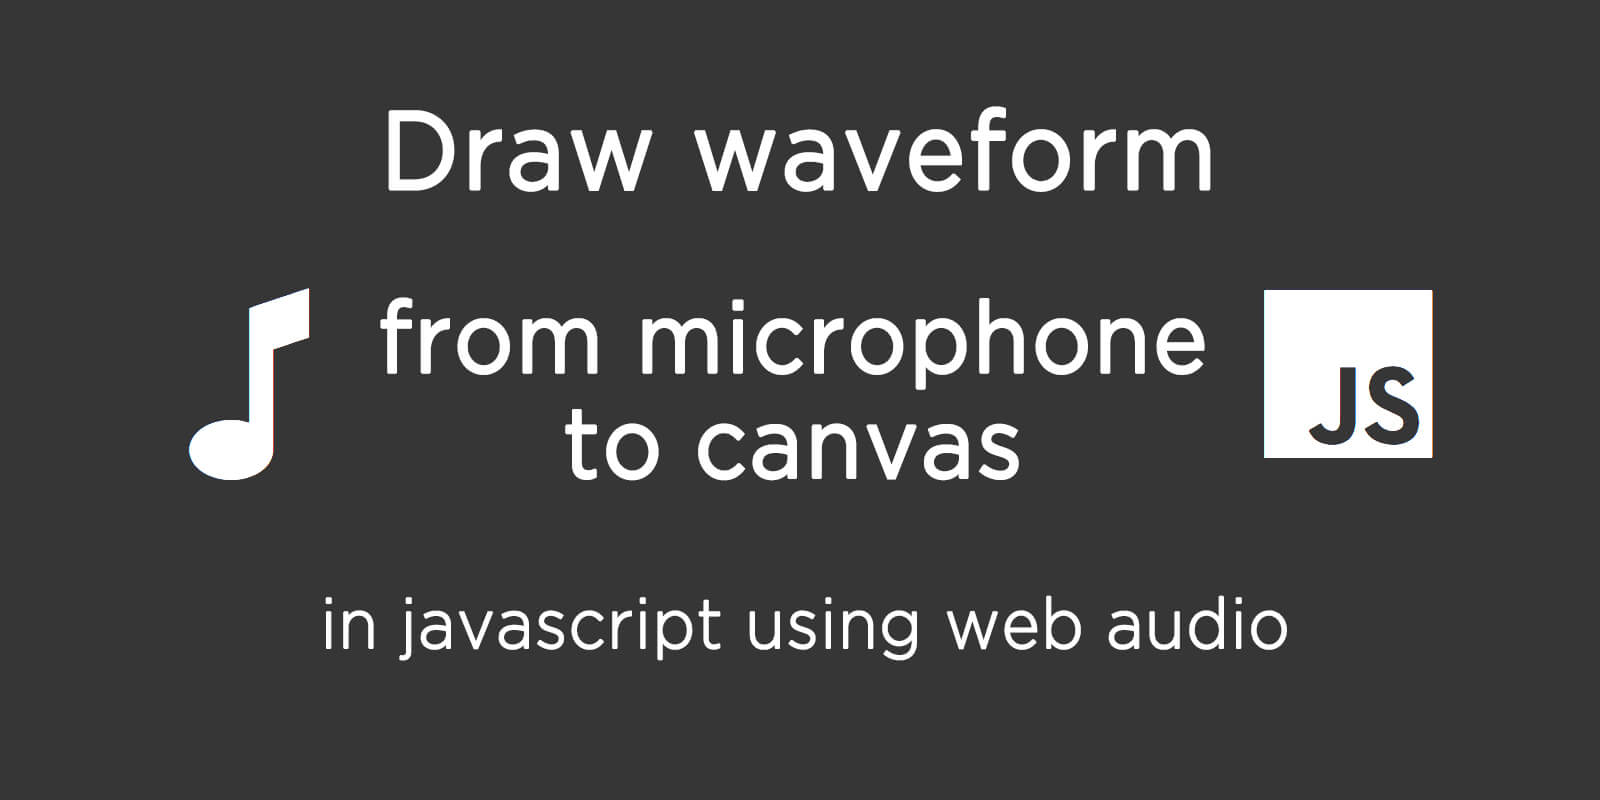 Draw waveform from micrphone to canvas